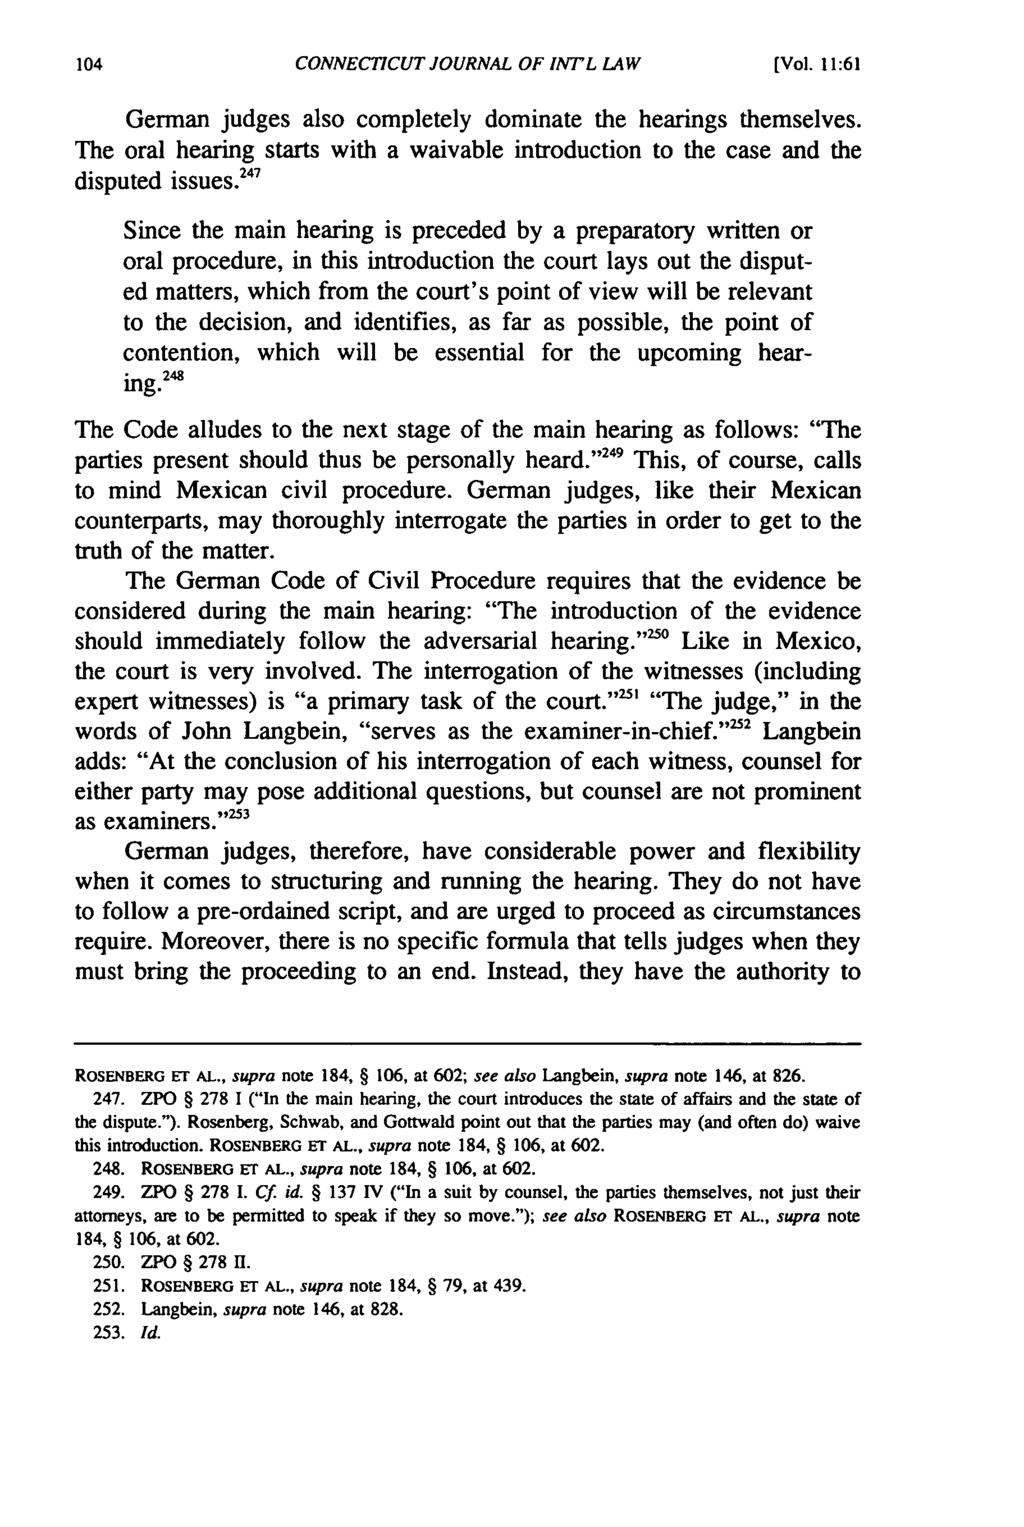 CONNECTICUT JOURNAL OF INT'L LAW [Vol. 11:61 German judges also completely dominate the hearings themselves. The oral hearing starts with a waivable introduction to the case and the disputed issues.